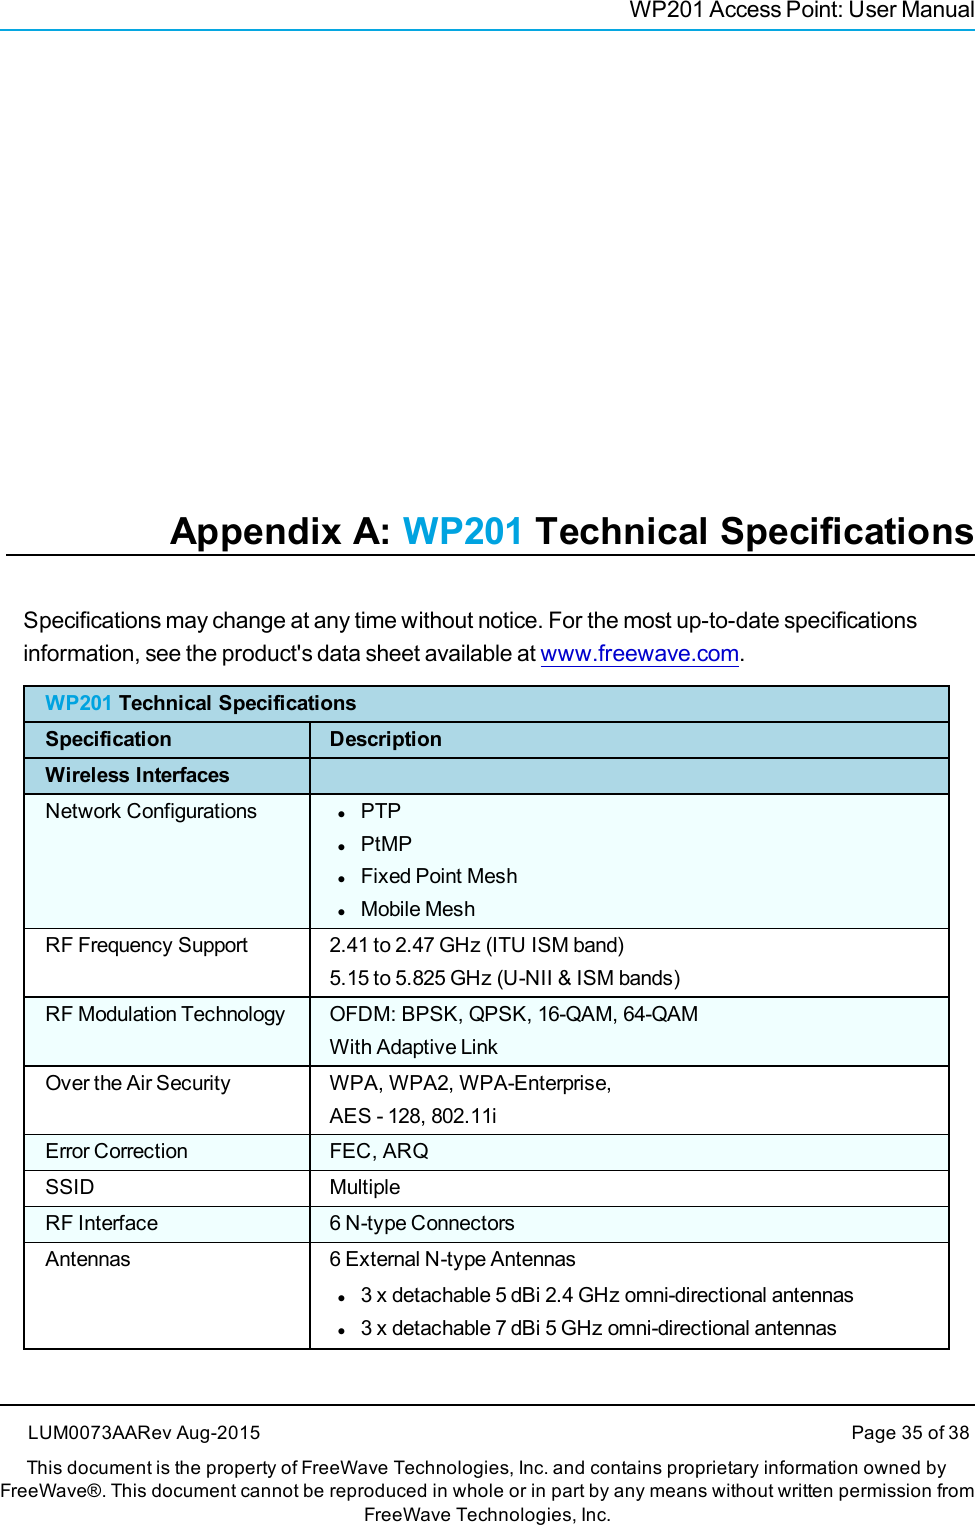 WP201 Access Point: User ManualAppendix A: WP201 Technical SpecificationsSpecifications may change at any time without notice. For the most up-to-date specificationsinformation, see the product&apos;s data sheet available at www.freewave.com.WP201 Technical SpecificationsSpecification DescriptionWireless InterfacesNetwork Configurations lPTPlPtMPlFixed Point MeshlMobile MeshRF Frequency Support 2.41 to 2.47 GHz (ITU ISM band)5.15 to 5.825 GHz (U-NII &amp; ISM bands)RF Modulation Technology OFDM: BPSK, QPSK, 16-QAM, 64-QAMWith Adaptive LinkOver the Air Security WPA, WPA2, WPA-Enterprise,AES - 128, 802.11iError Correction FEC, ARQSSID MultipleRF Interface 6 N-type ConnectorsAntennas 6 External N-type Antennasl3 x detachable 5 dBi 2.4 GHz omni-directional antennasl3 x detachable 7 dBi 5 GHz omni-directional antennasLUM0073AARev Aug-2015 Page 35 of 38This document is the property of FreeWave Technologies, Inc. and contains proprietary information owned byFreeWave®. This document cannot be reproduced in whole or in part by any means without written permission fromFreeWave Technologies, Inc.